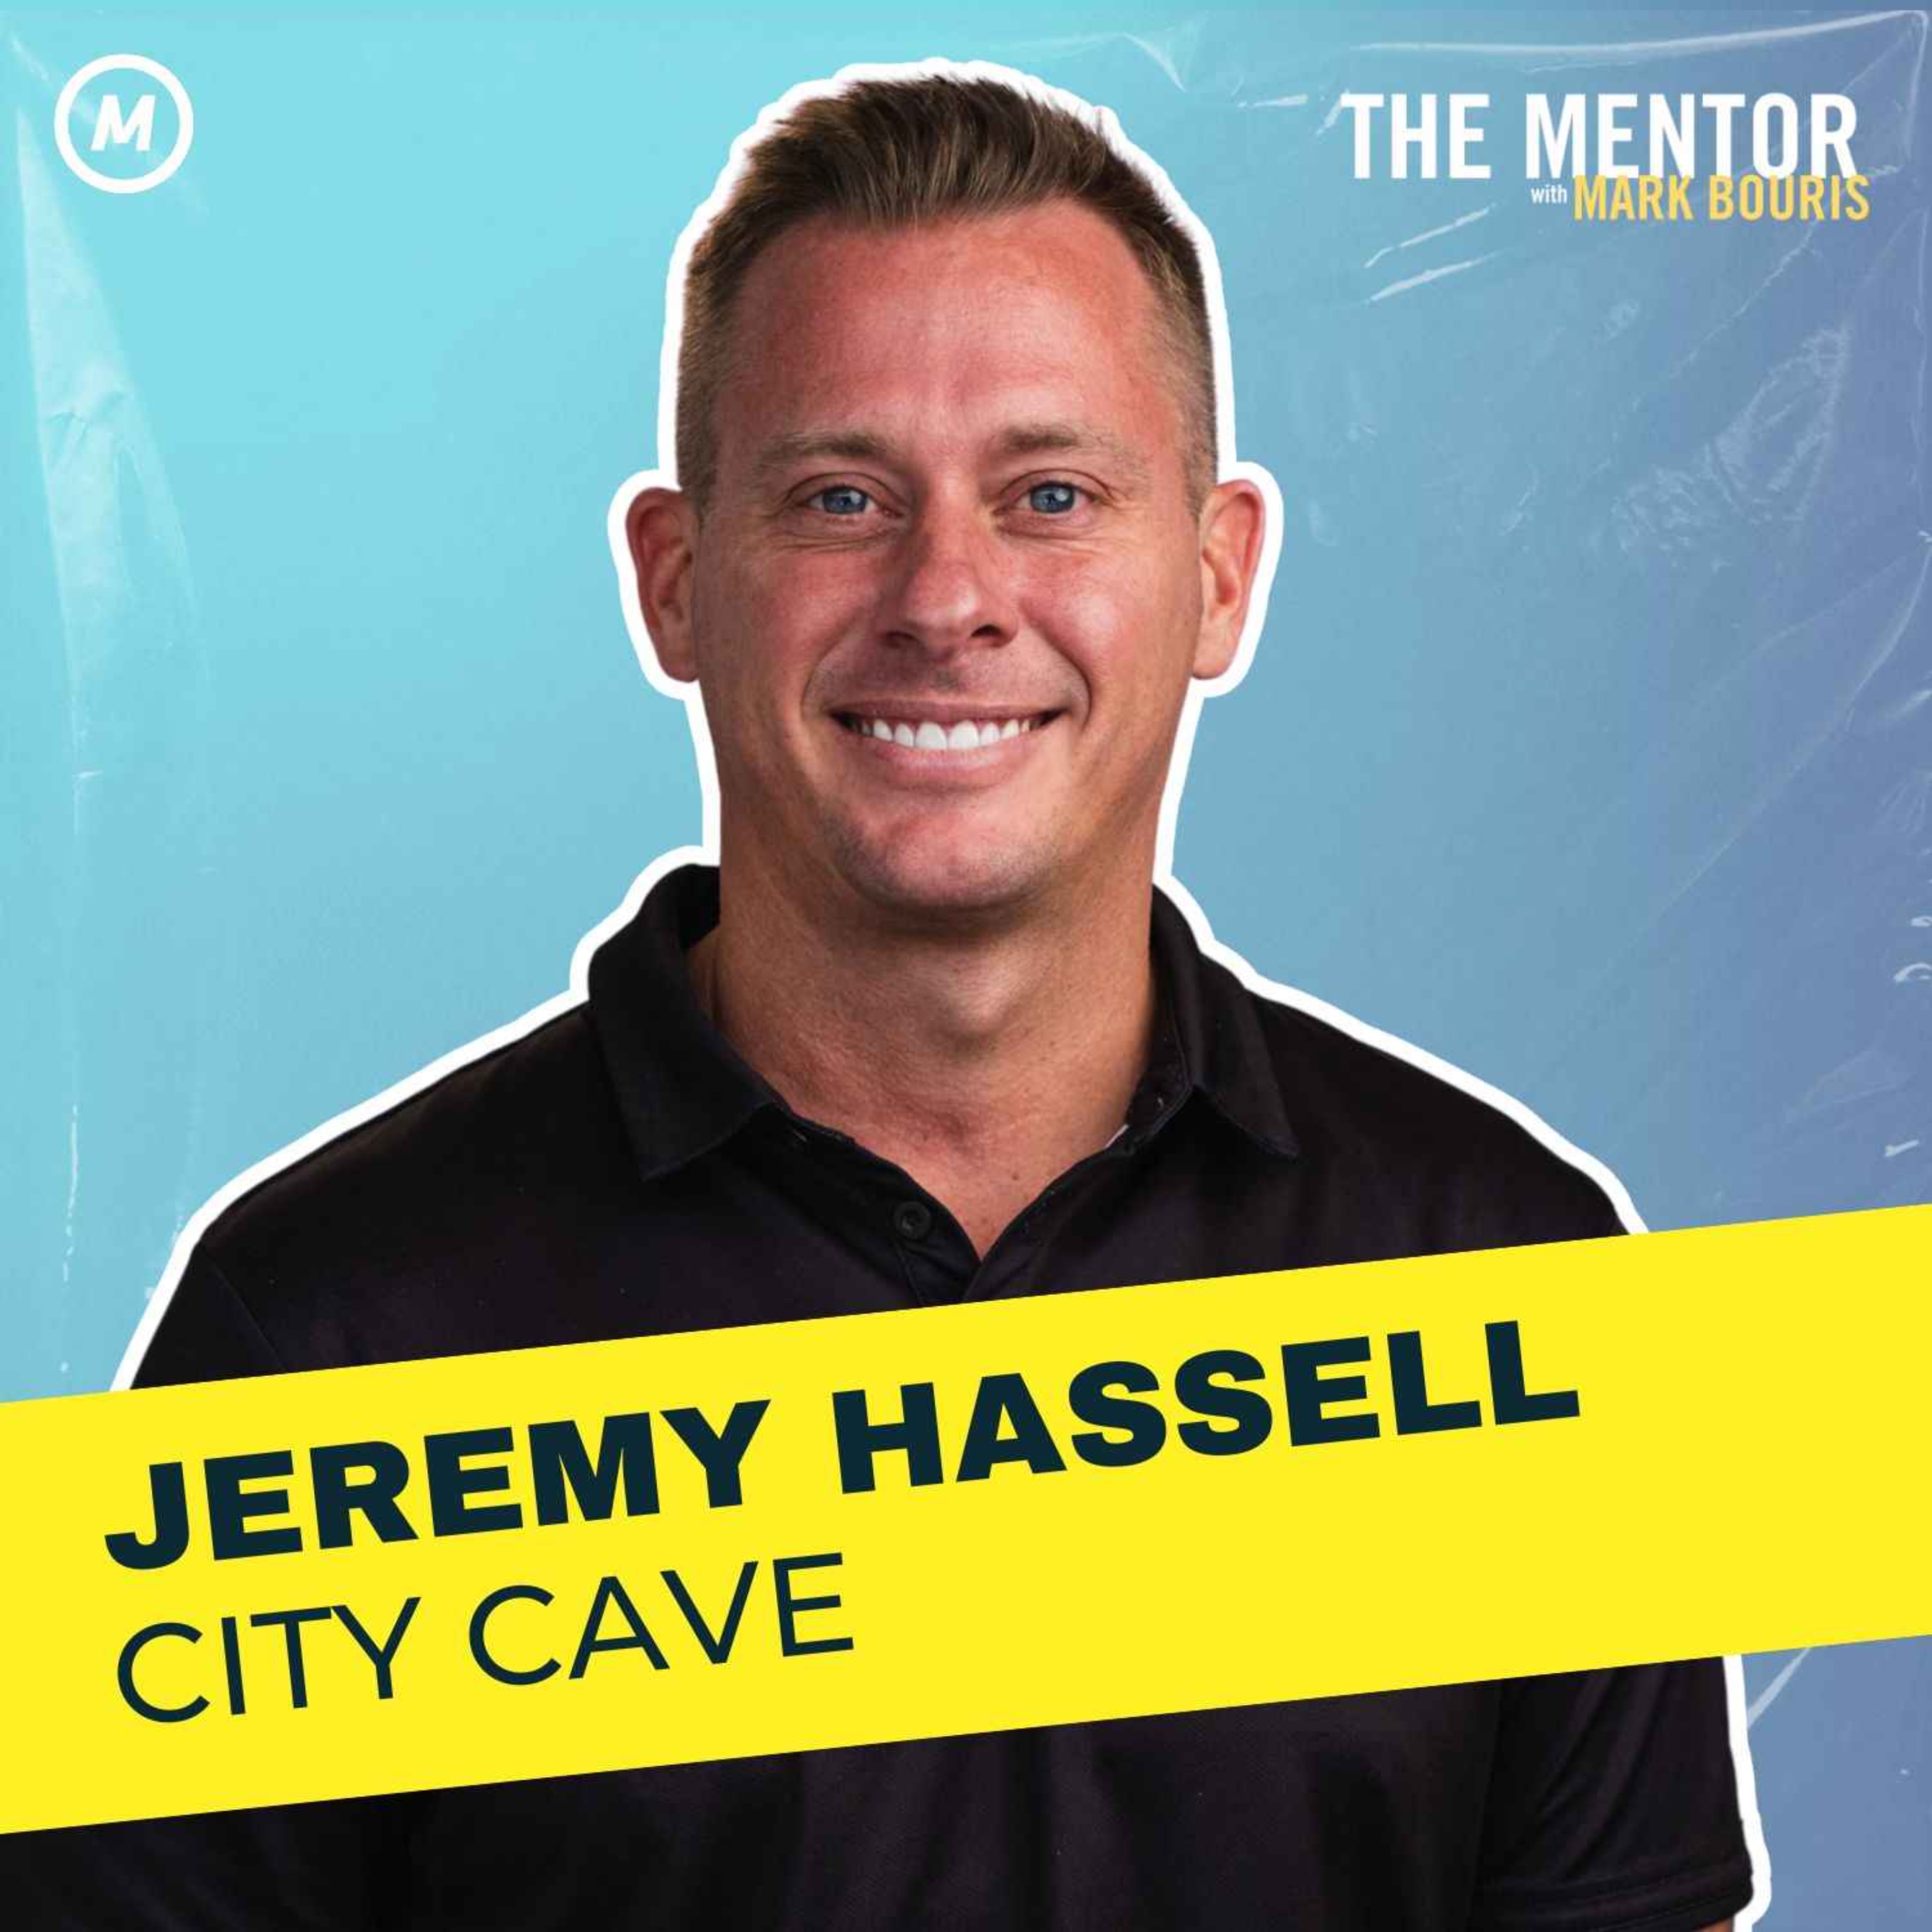 #434 Conscious Capitalism: How Jeremy Hassell has profited on giving life back to humanity